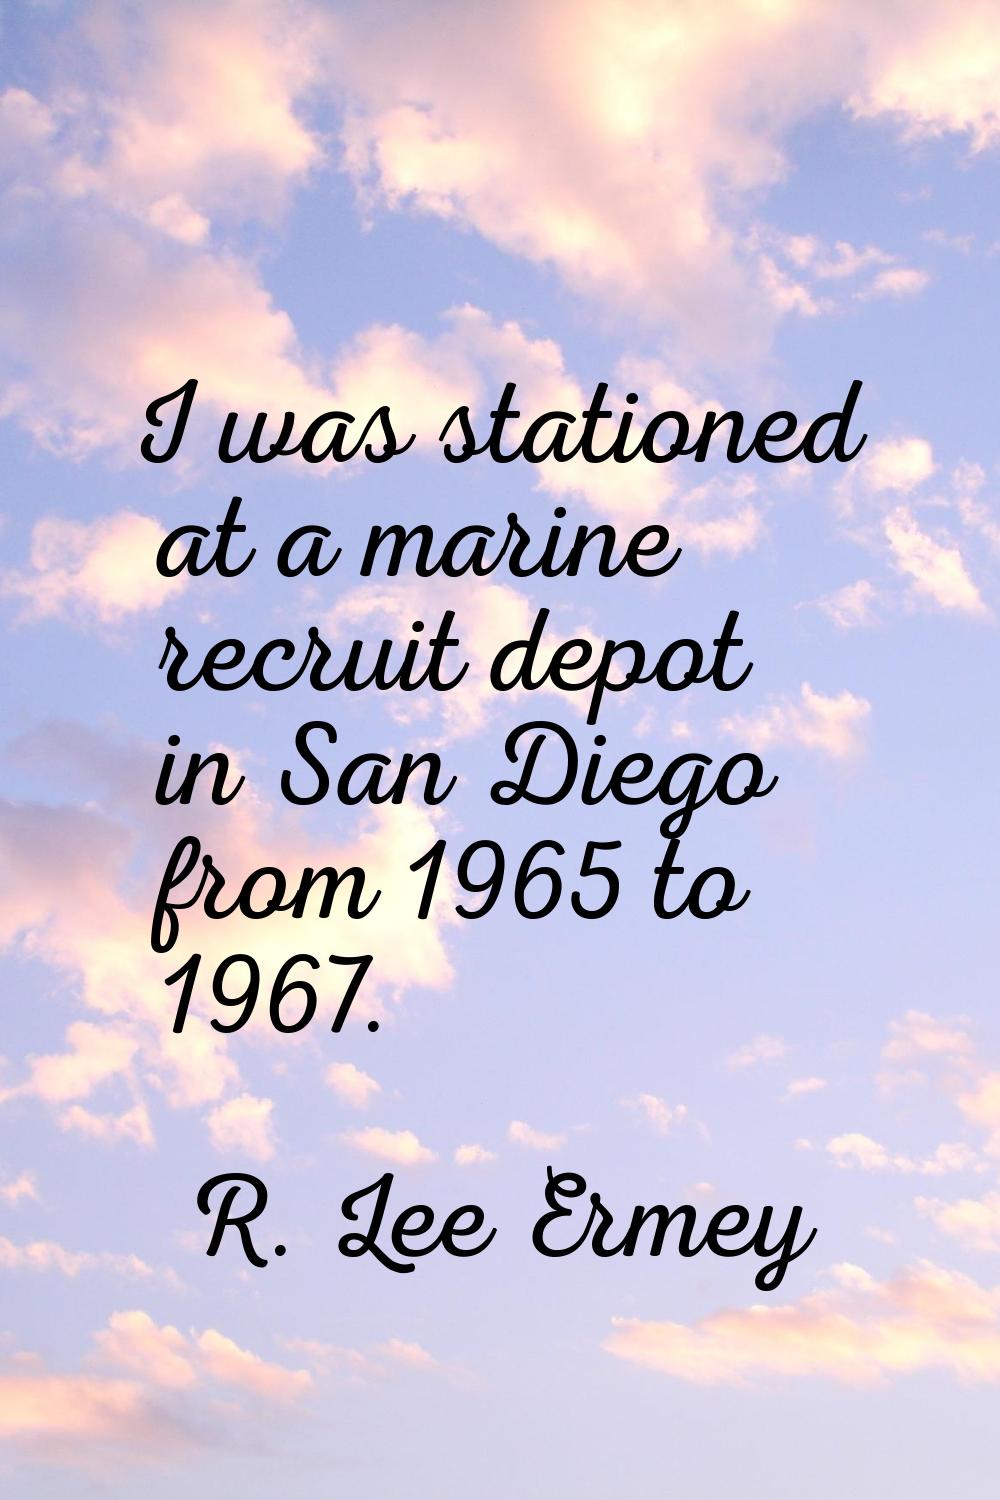 I was stationed at a marine recruit depot in San Diego from 1965 to 1967.